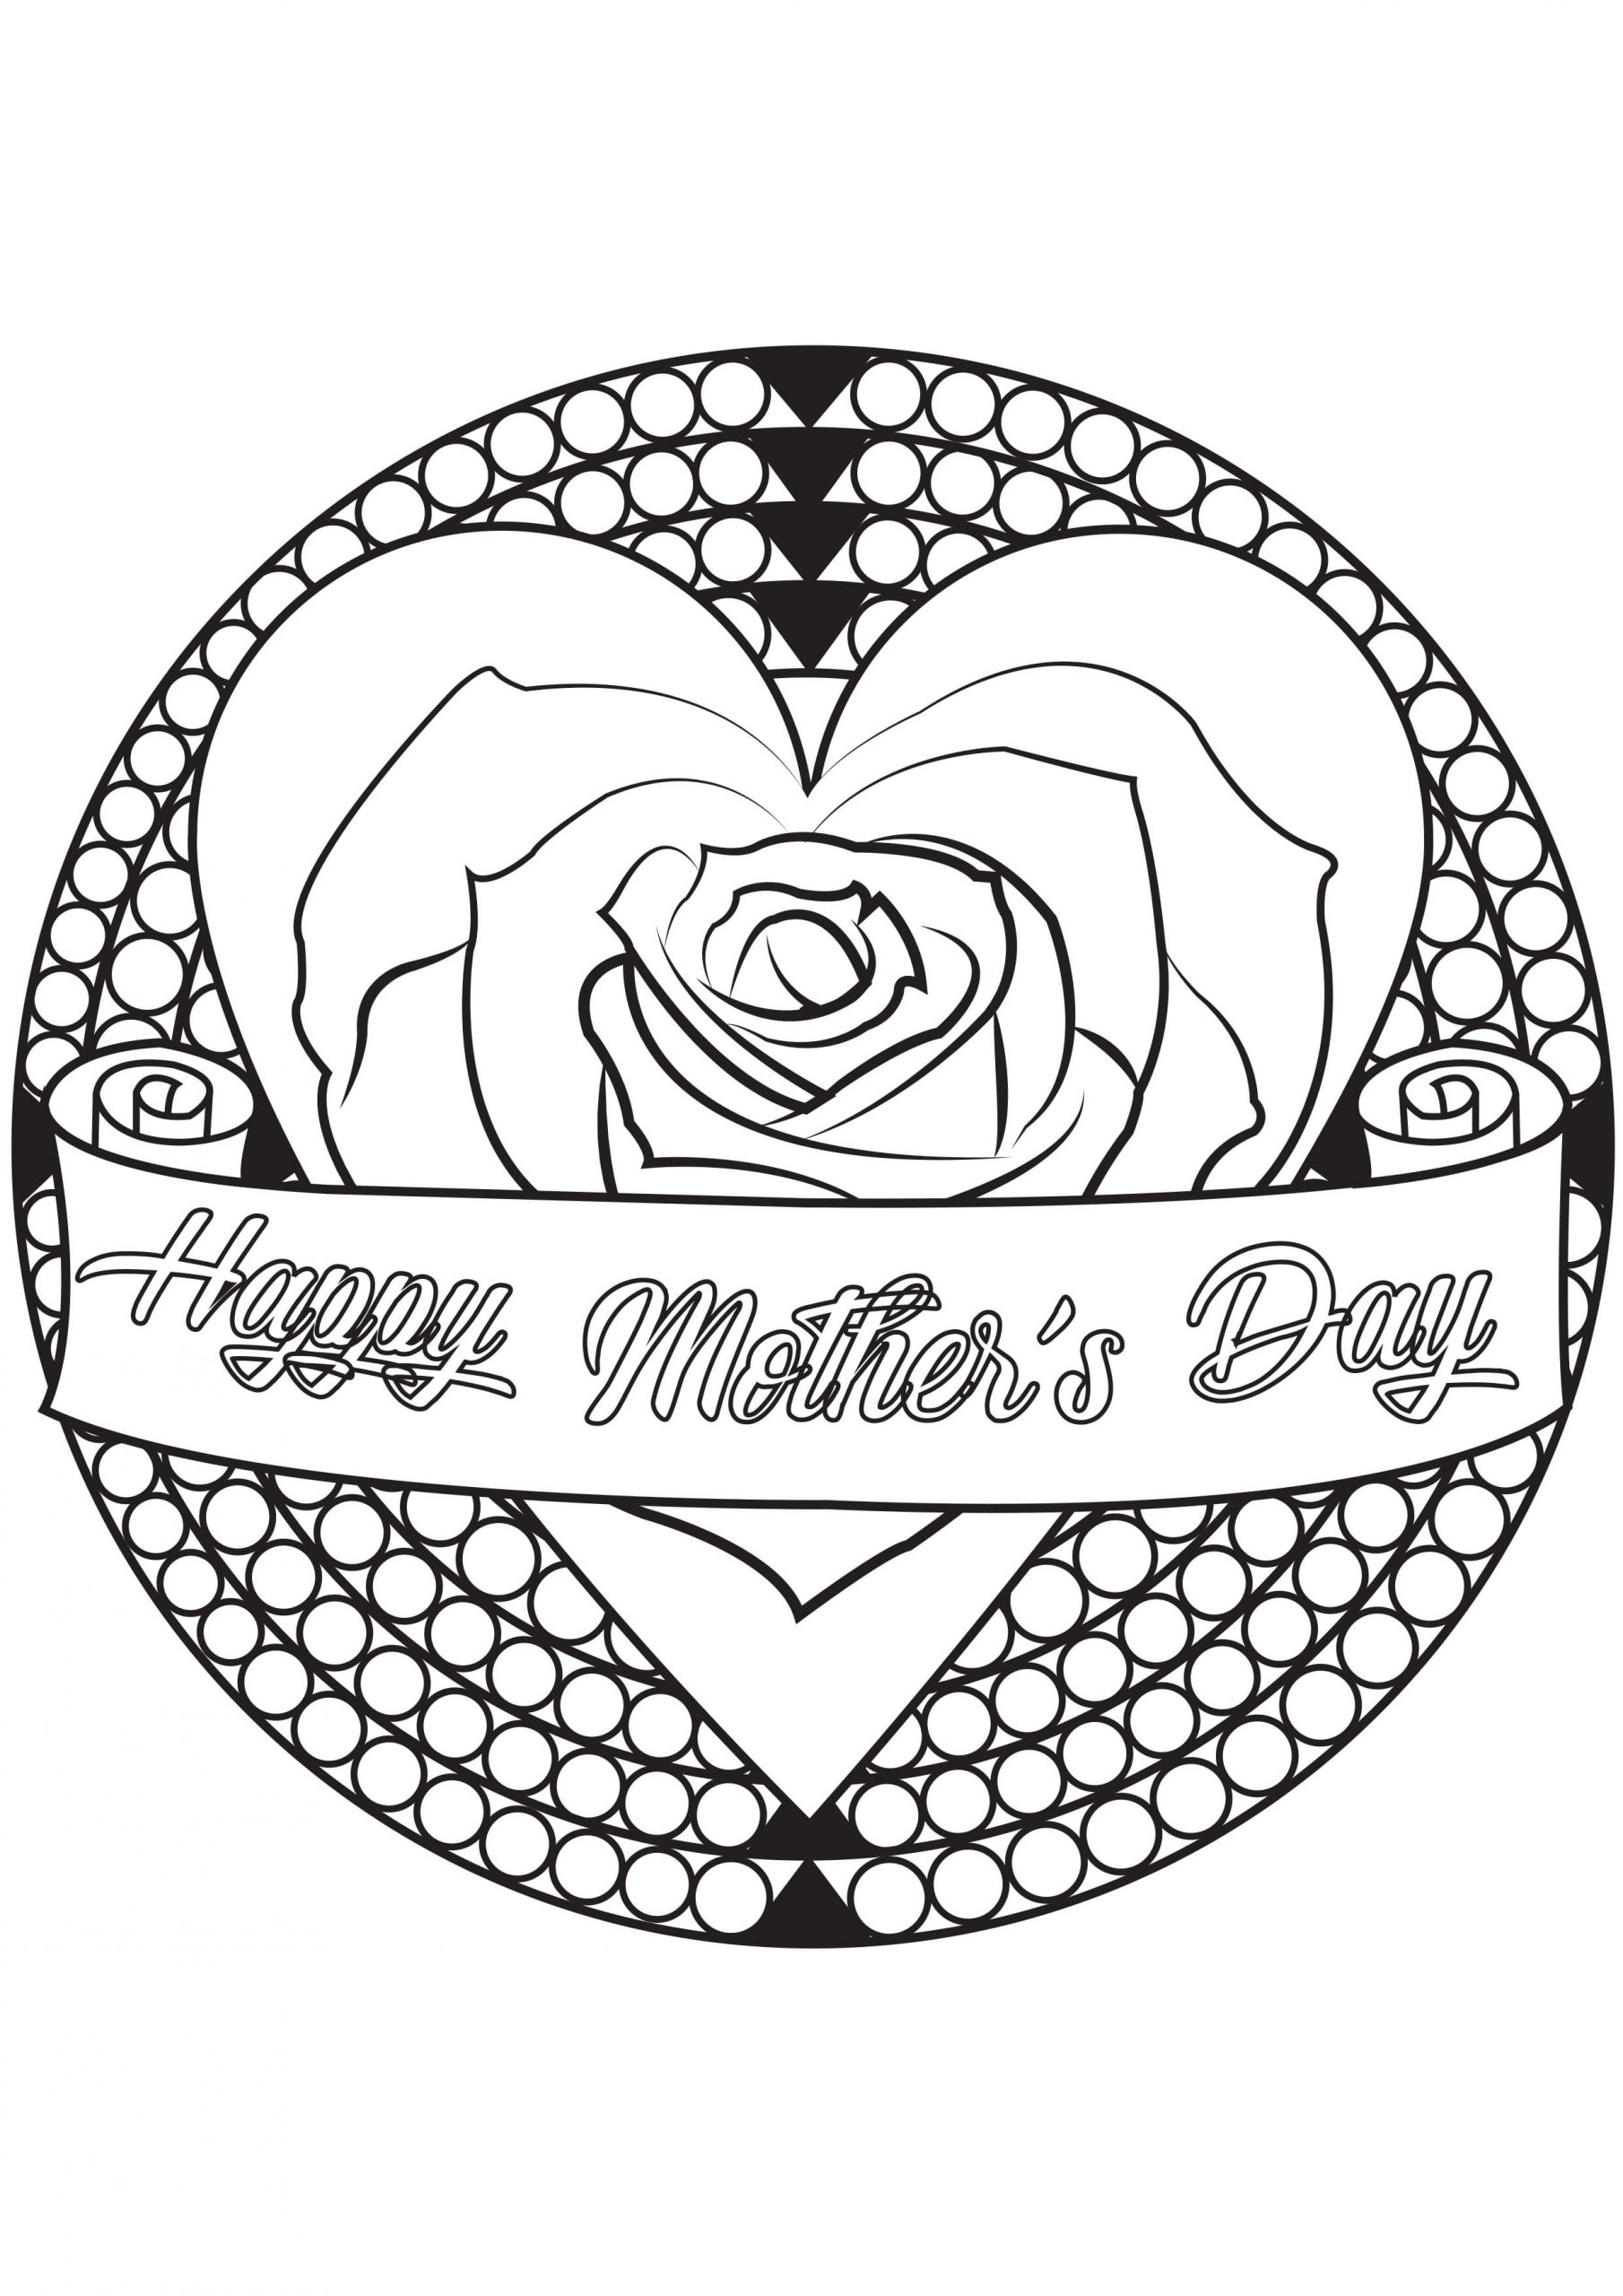 Coloring Page Special Mother’s Day Coloring Page